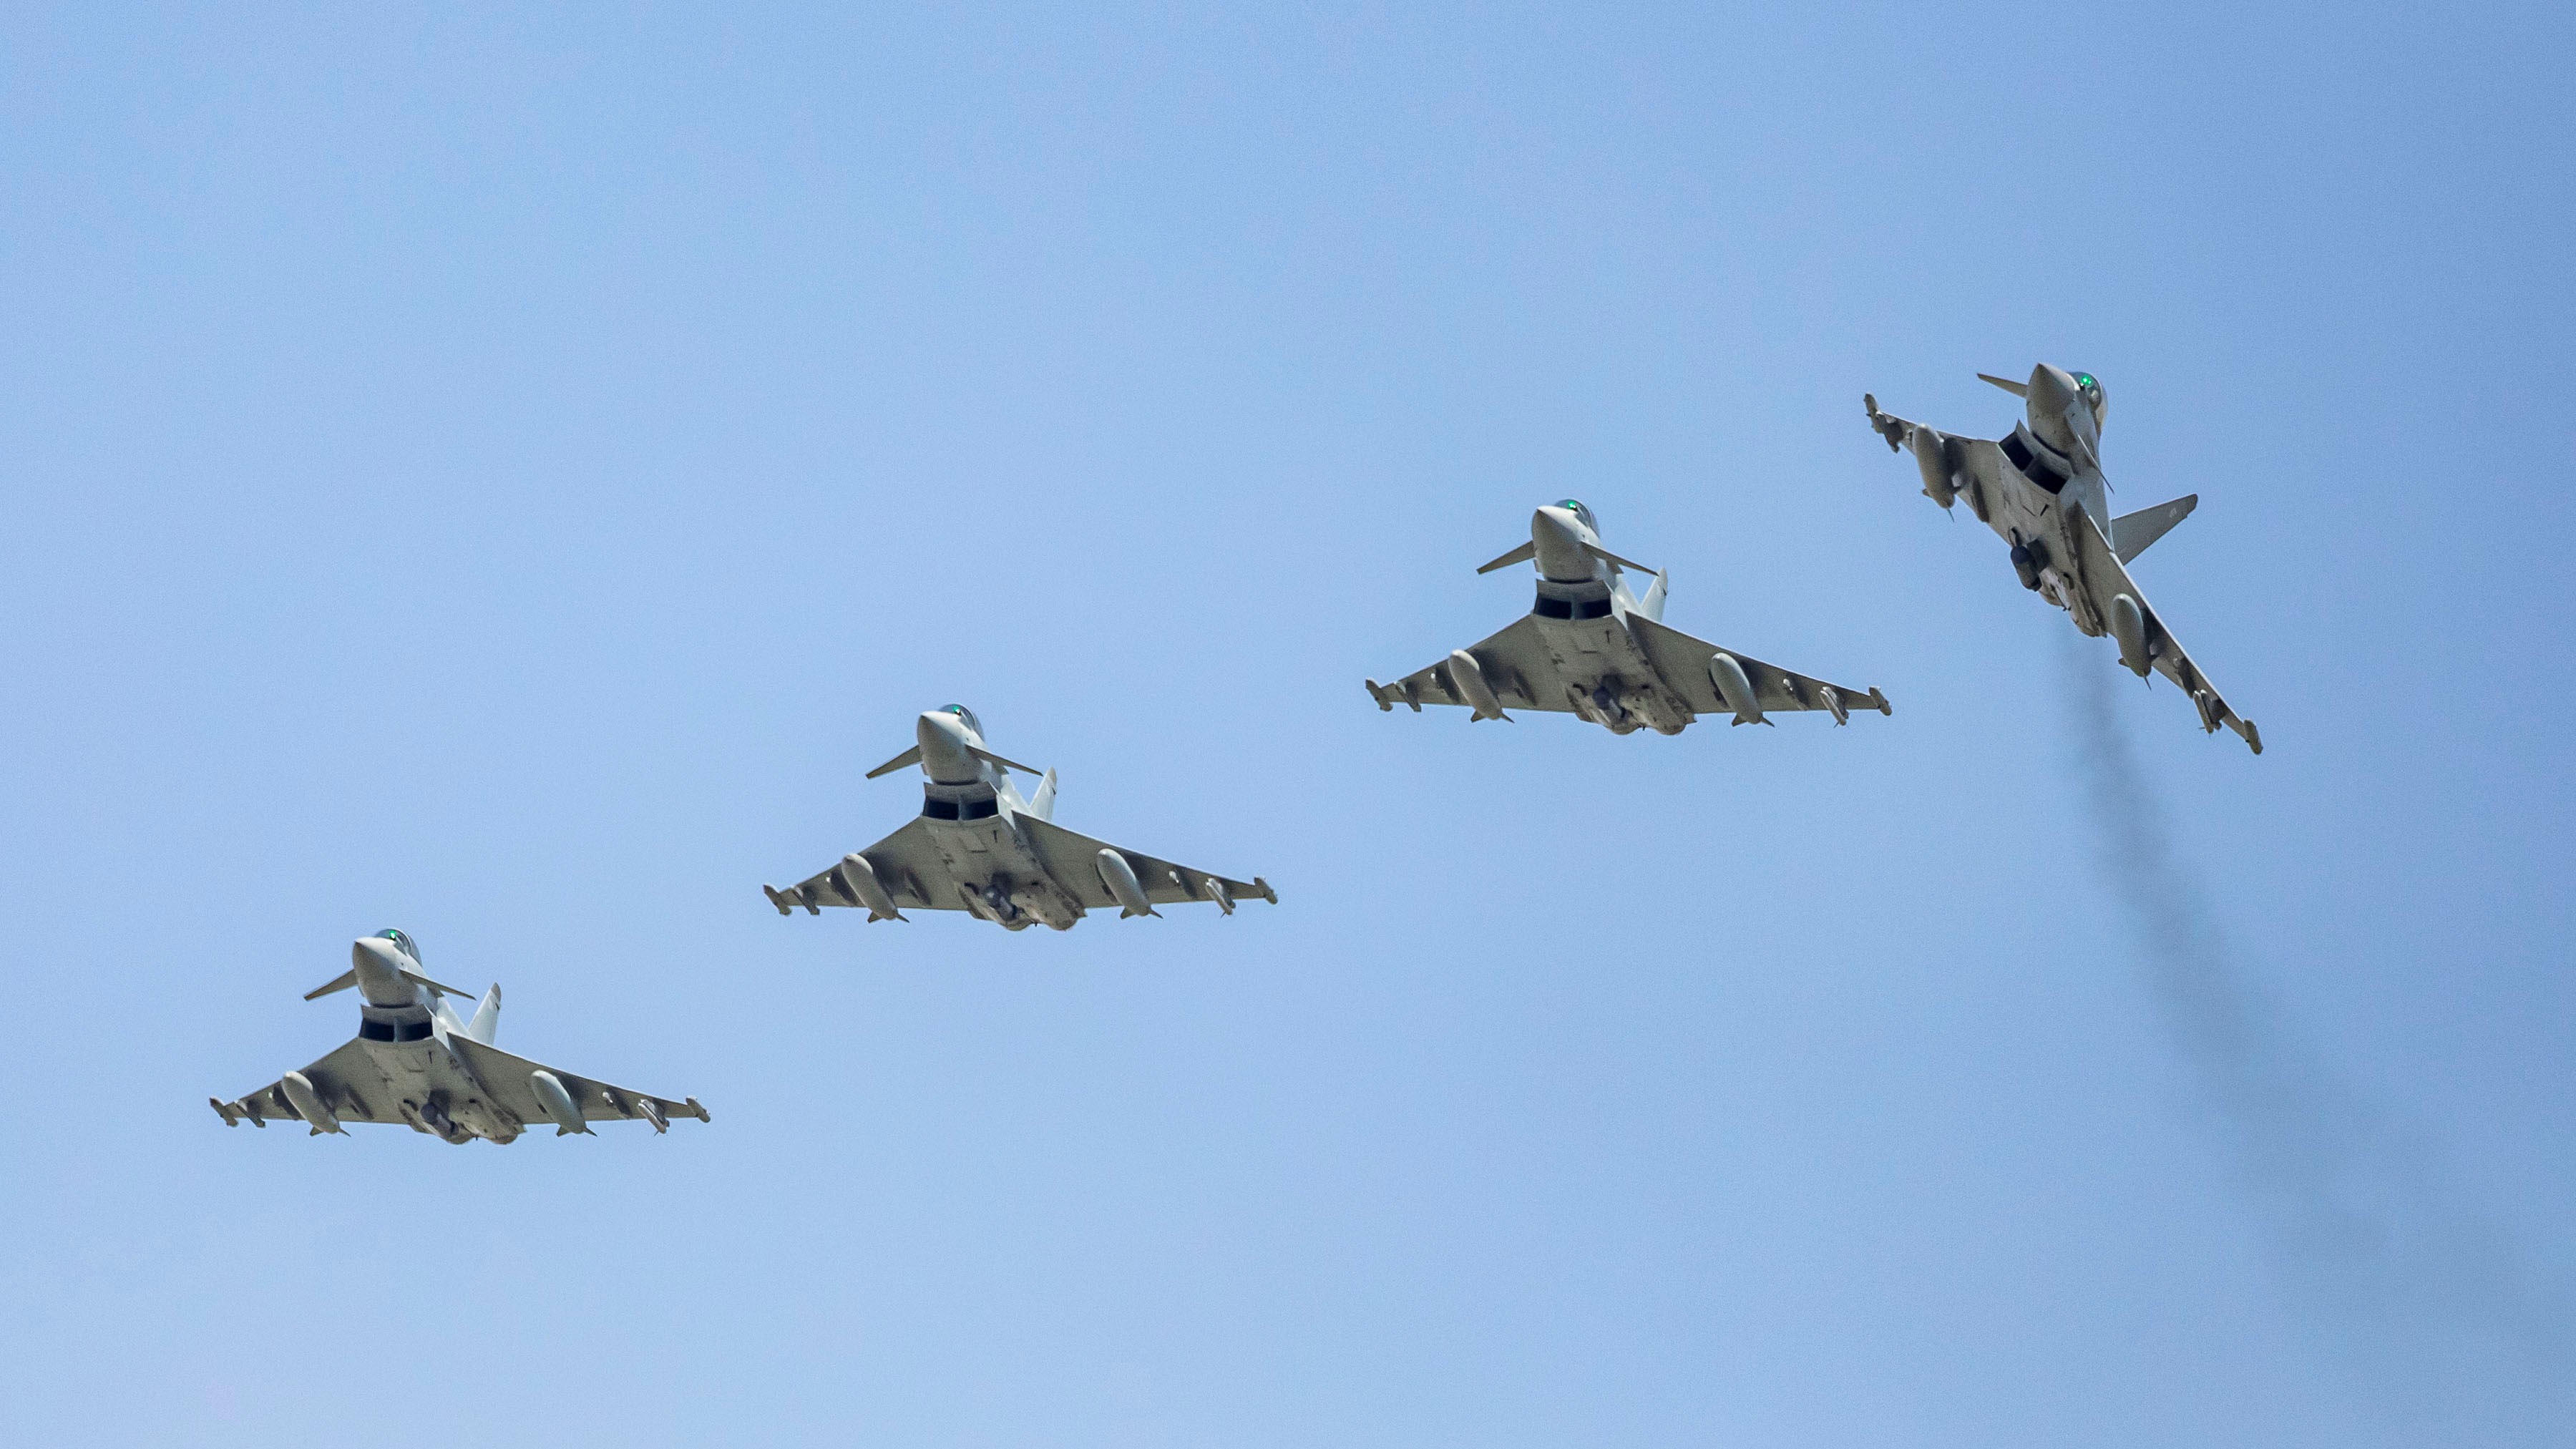 Image shows four RAF Typhoons flying in formation.